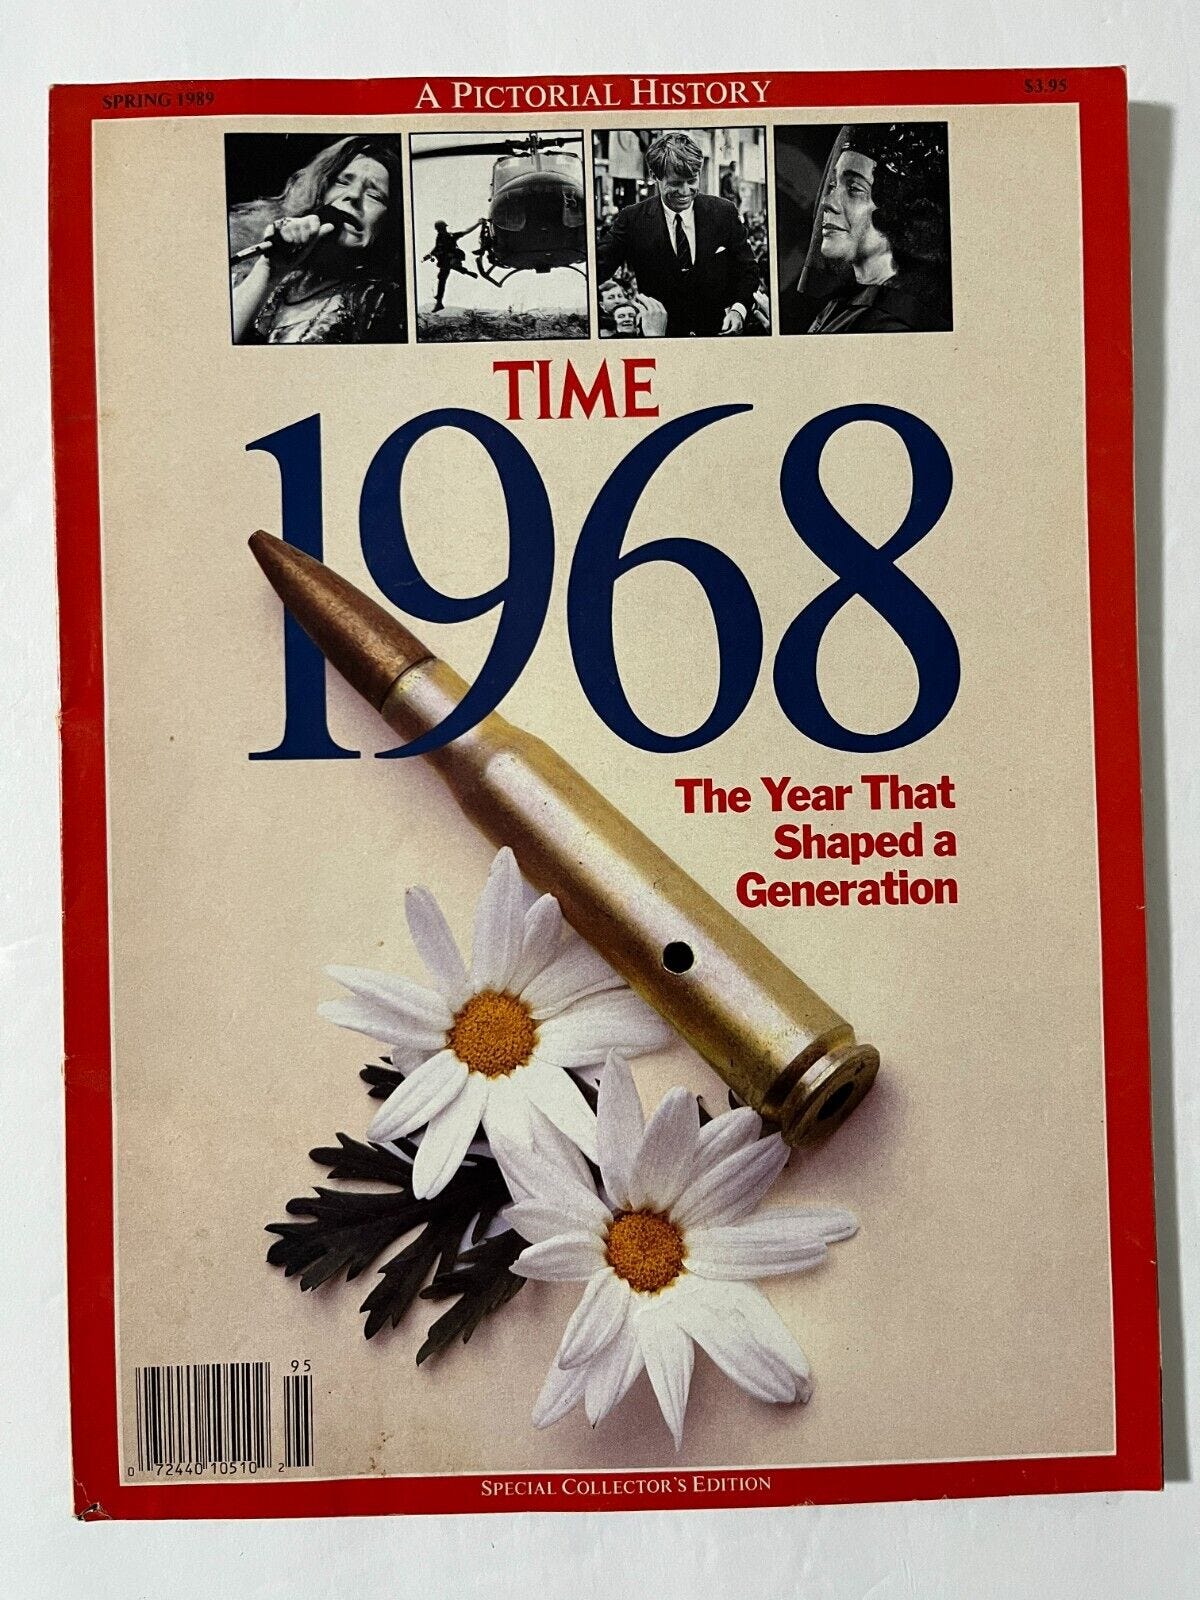 an image of a time magazine cover that says 1968, the year that shaped a generation